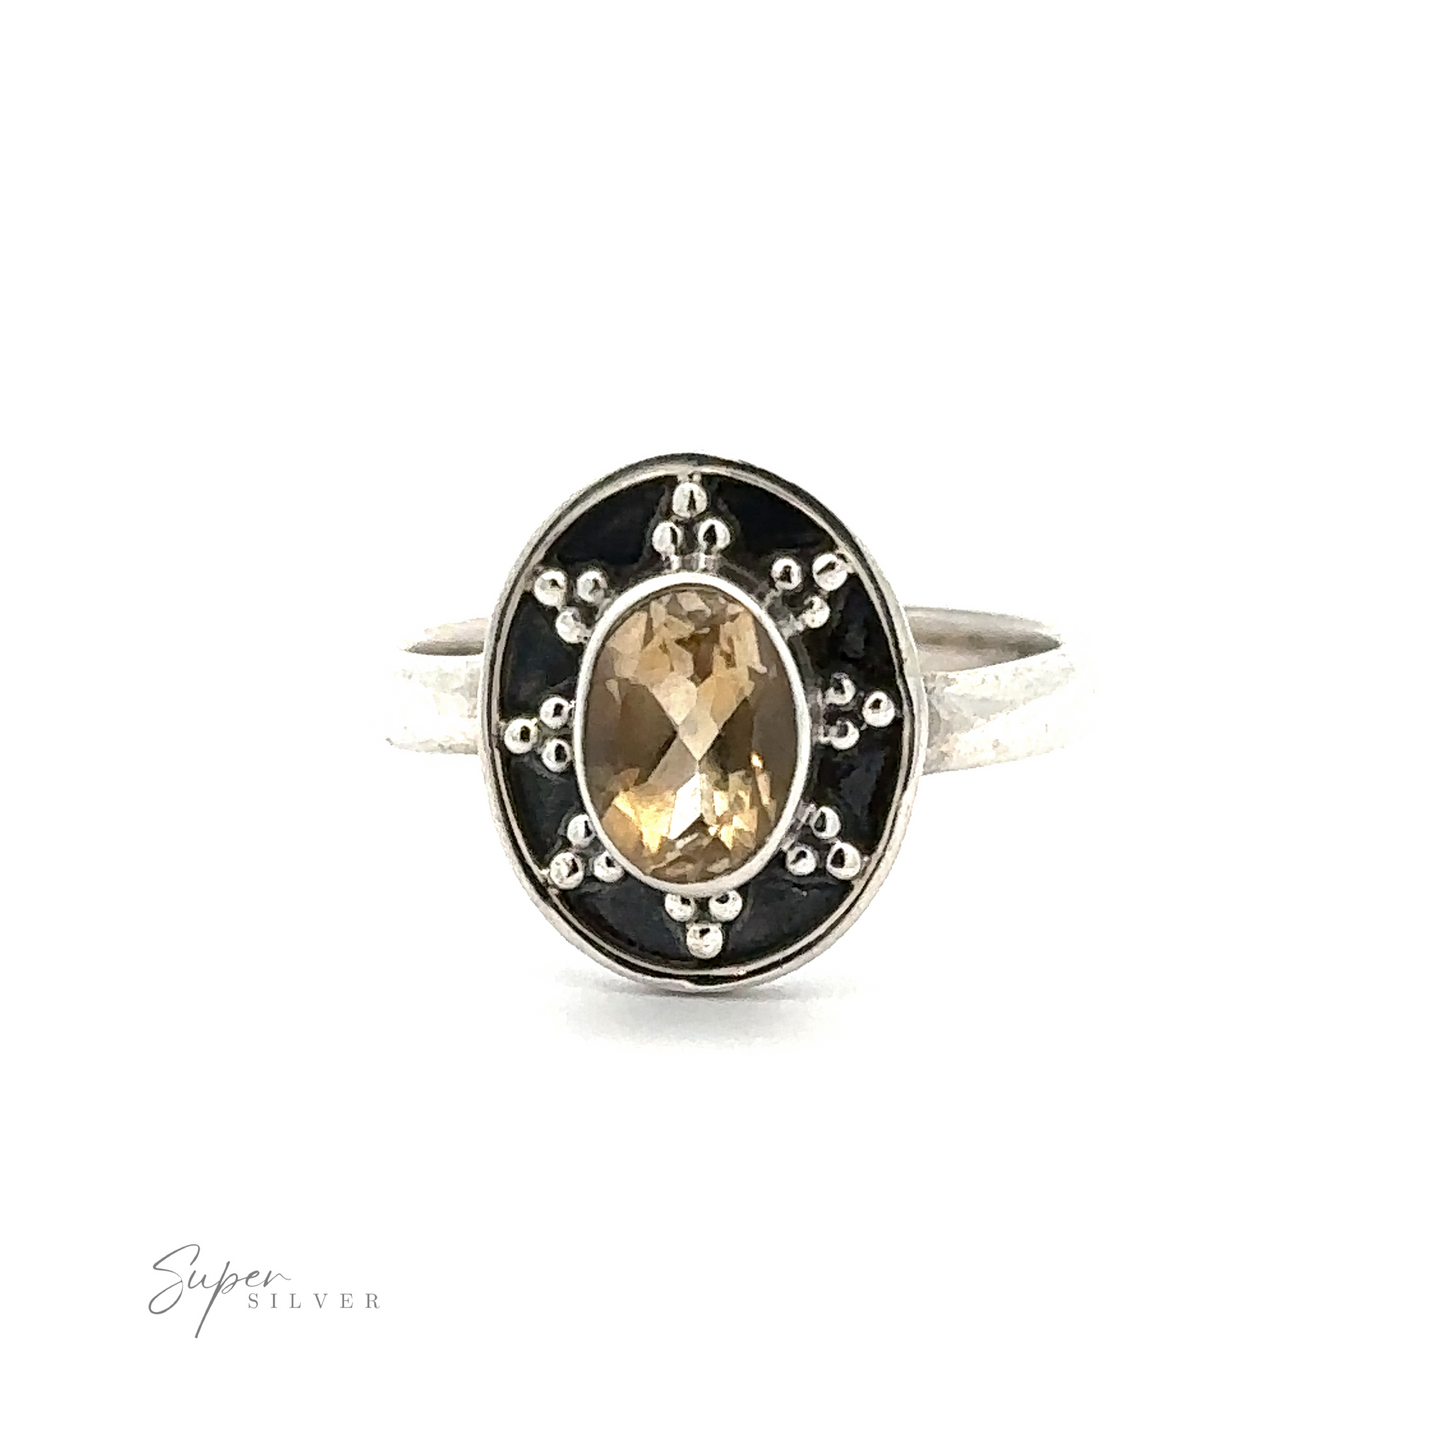 
                  
                    An Oval Gemstone Ring with Ball and Disk Border featuring an oval-cut yellow gemstone set in a decorative, black-bordered setting with dot accents, labeled "Super Silver" at the bottom. This vintage-inspired jewelry piece exudes timeless elegance and charm.
                  
                